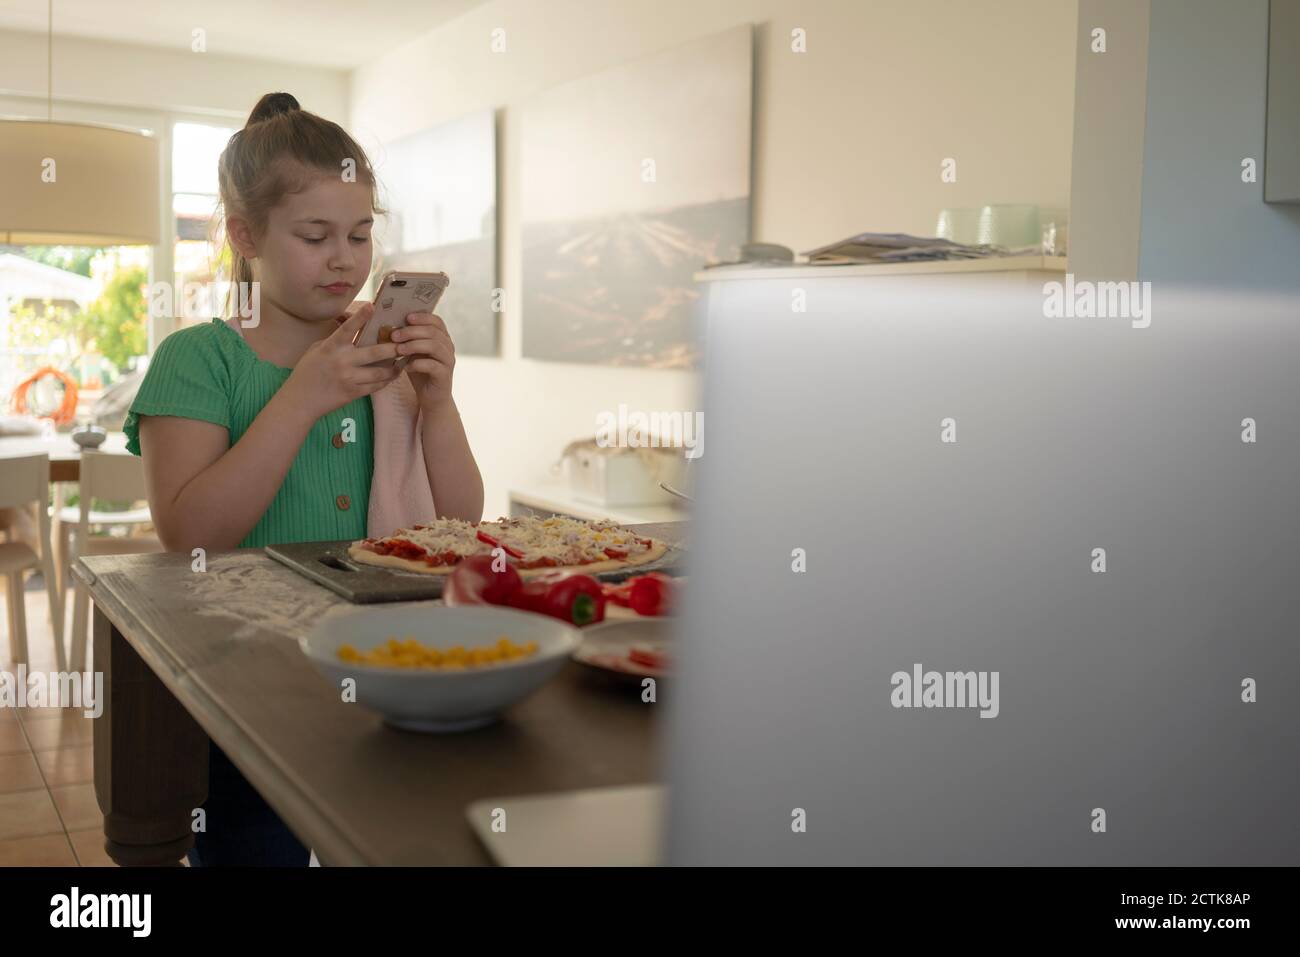 Girl taking photograph of pizza over kitchen island Stock Photo